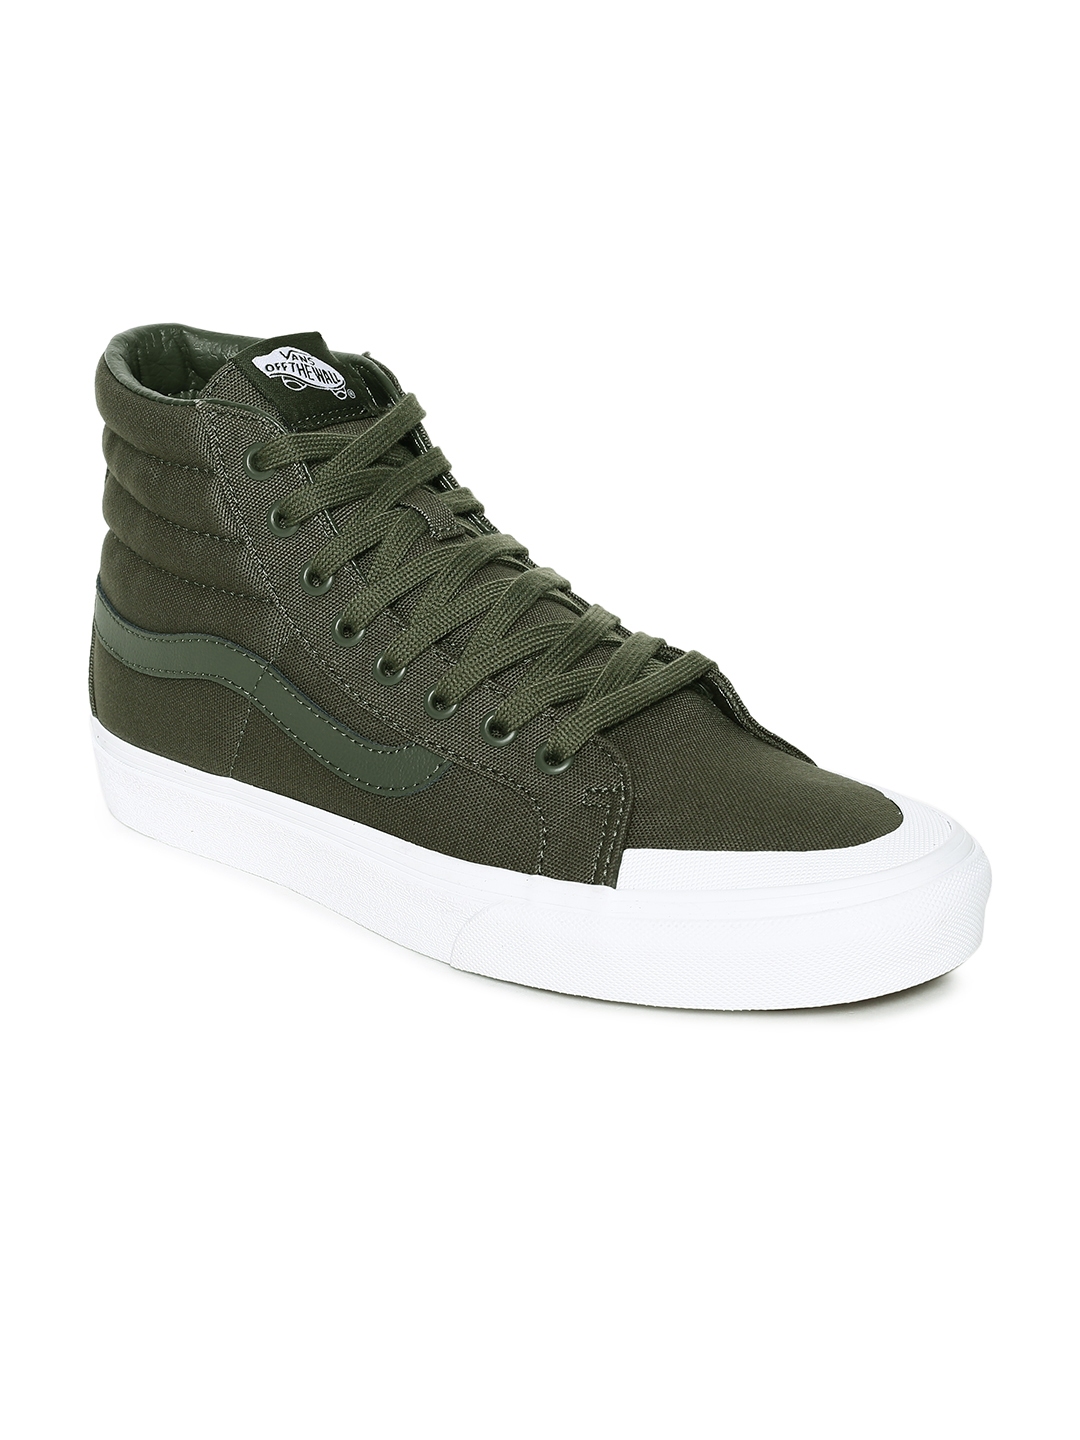 Buy Vans Unisex Olive Green Solid Mid Top Sneakers - Casual Shoes for ...